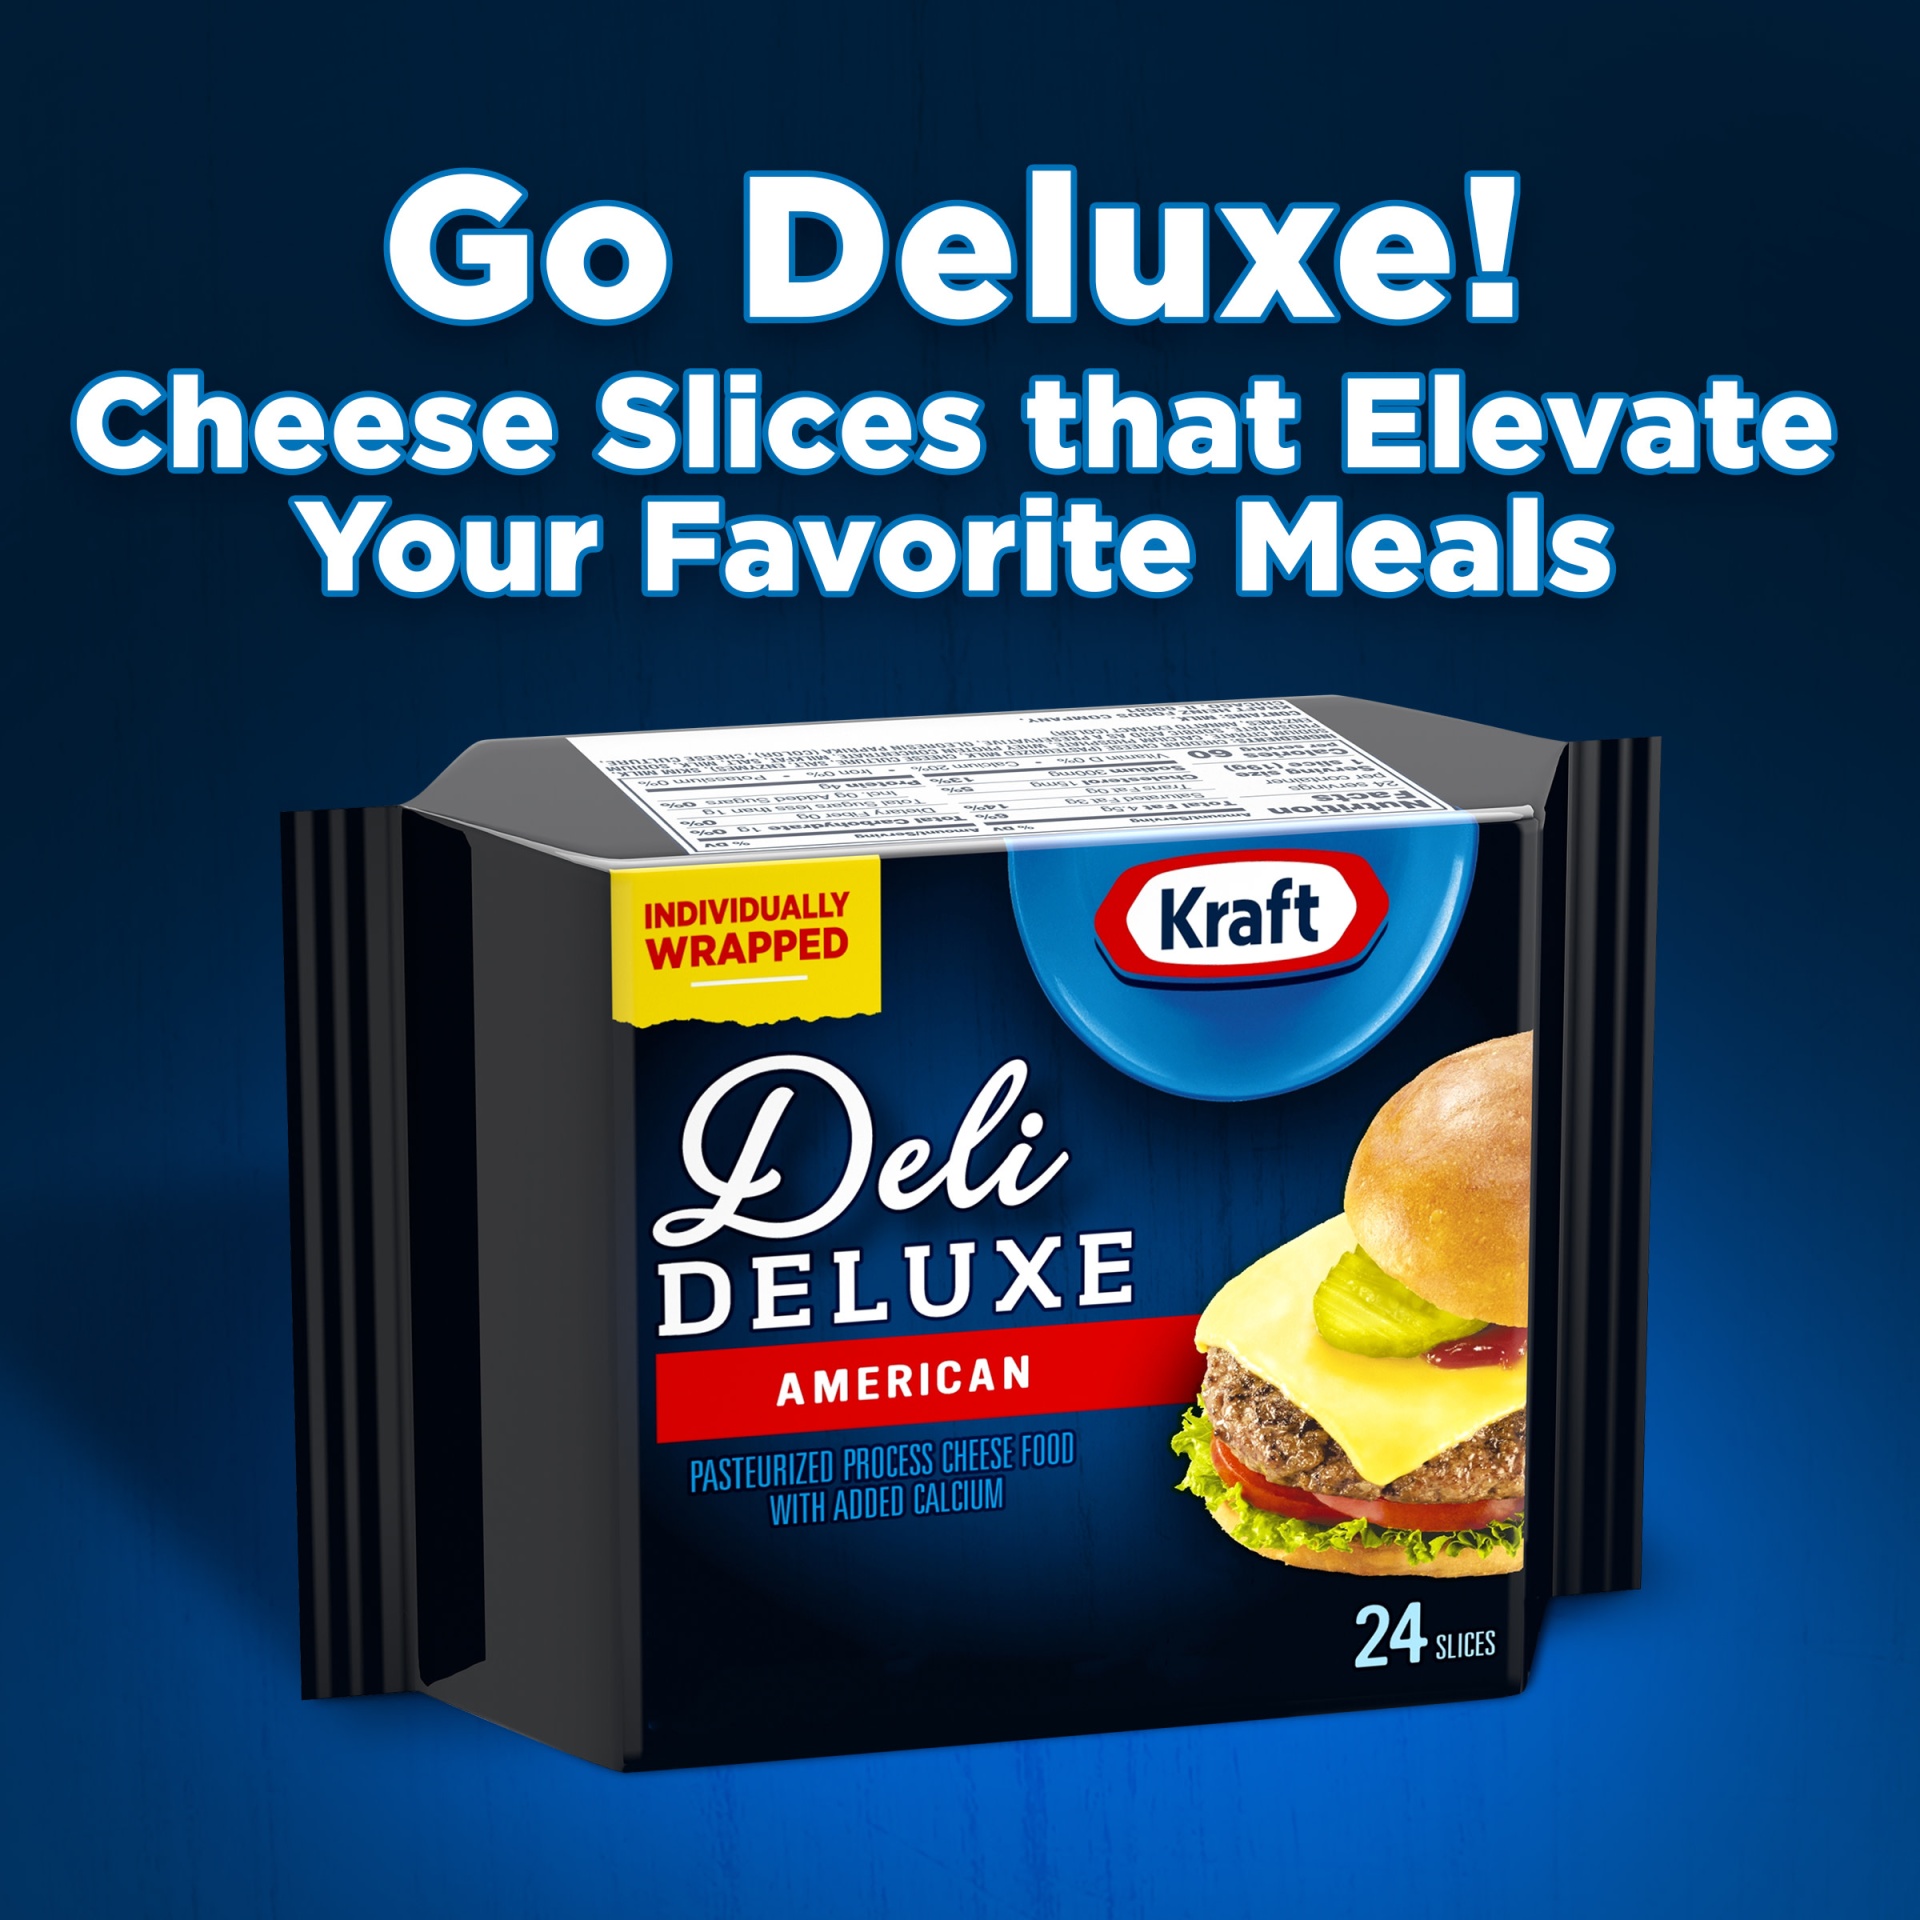 Kraft Deli Deluxe American Cheese Individually Wrapped Slices Pack